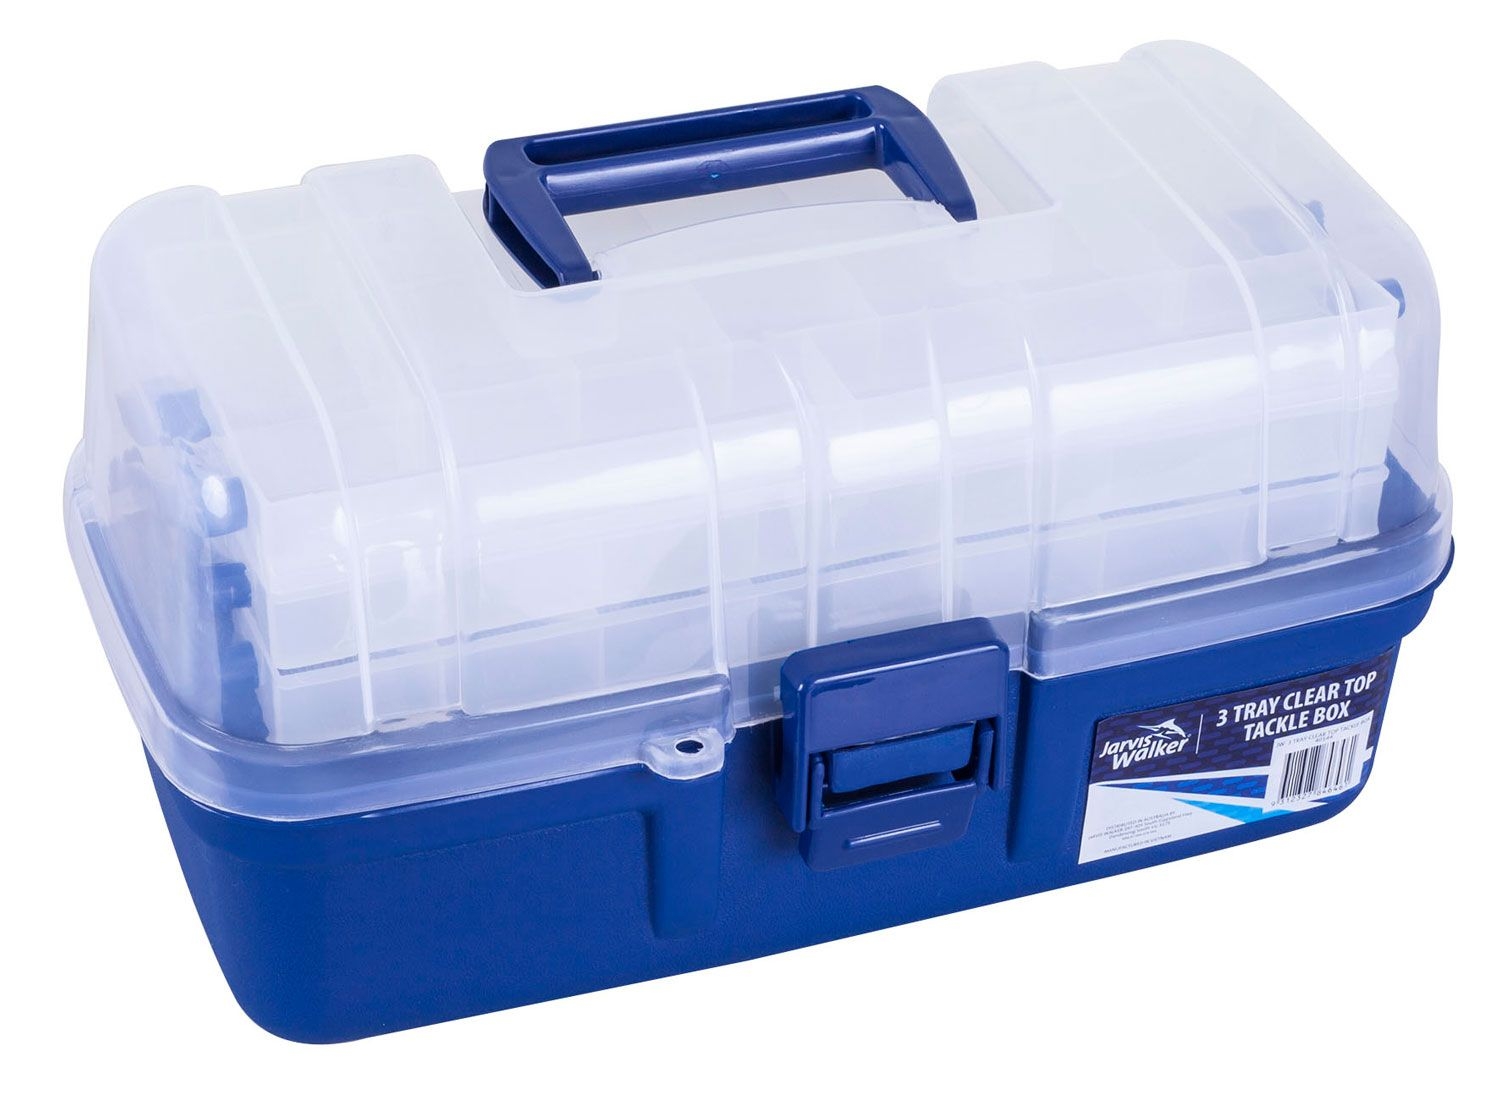 Jarvis Walker Clear Top Tackle Box 3 Tray